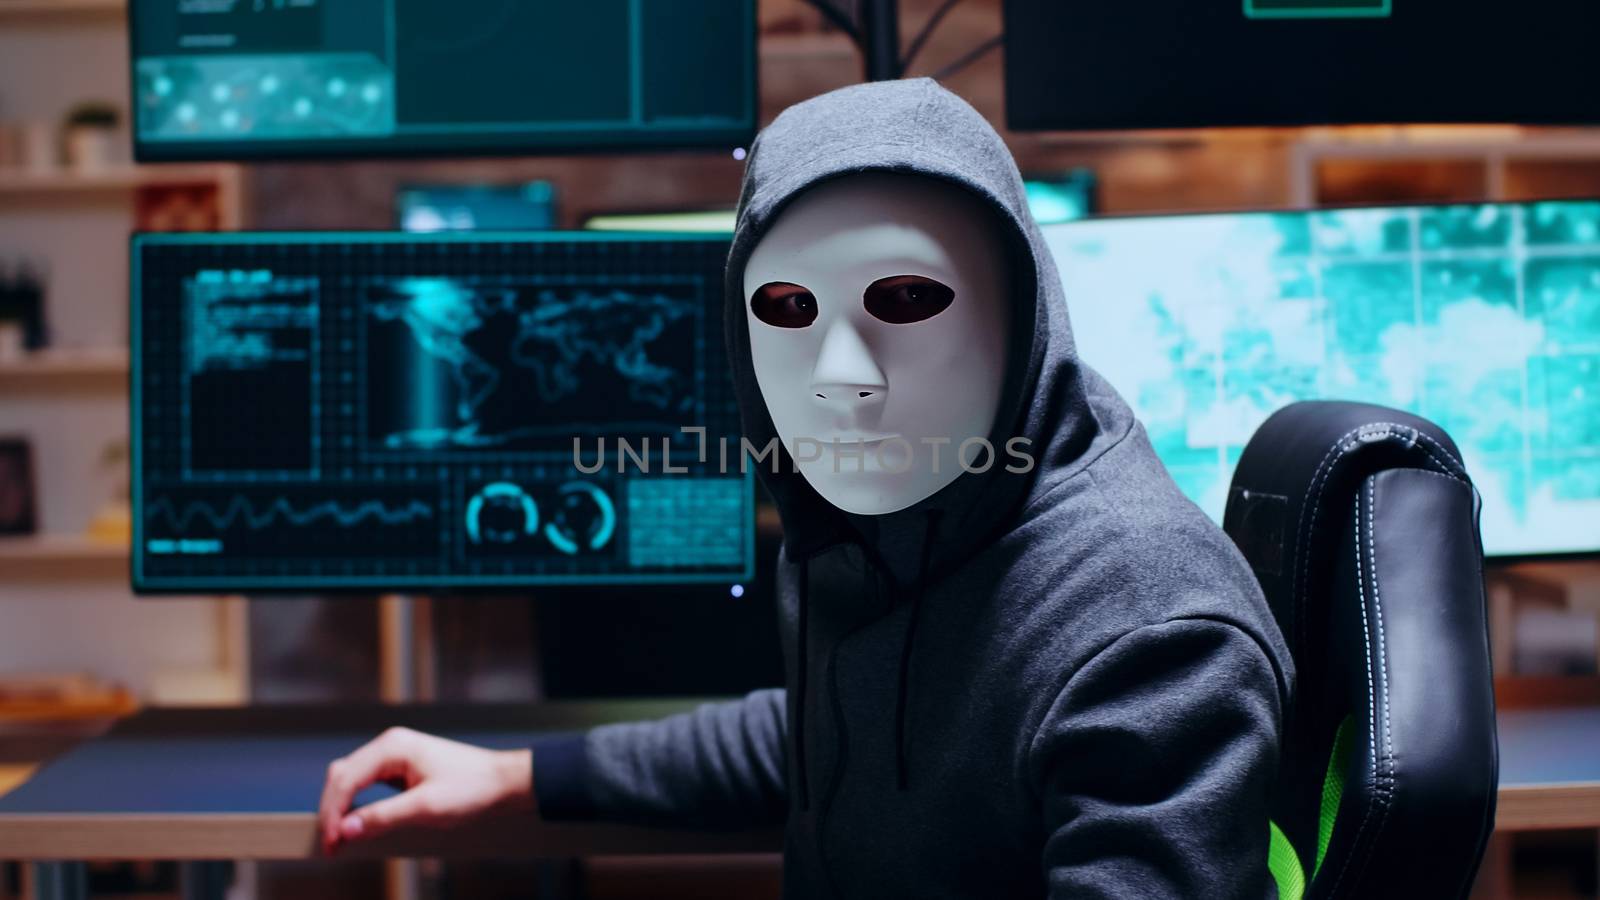 Wanted cyber criminal wearing a white mask while looking at camera.